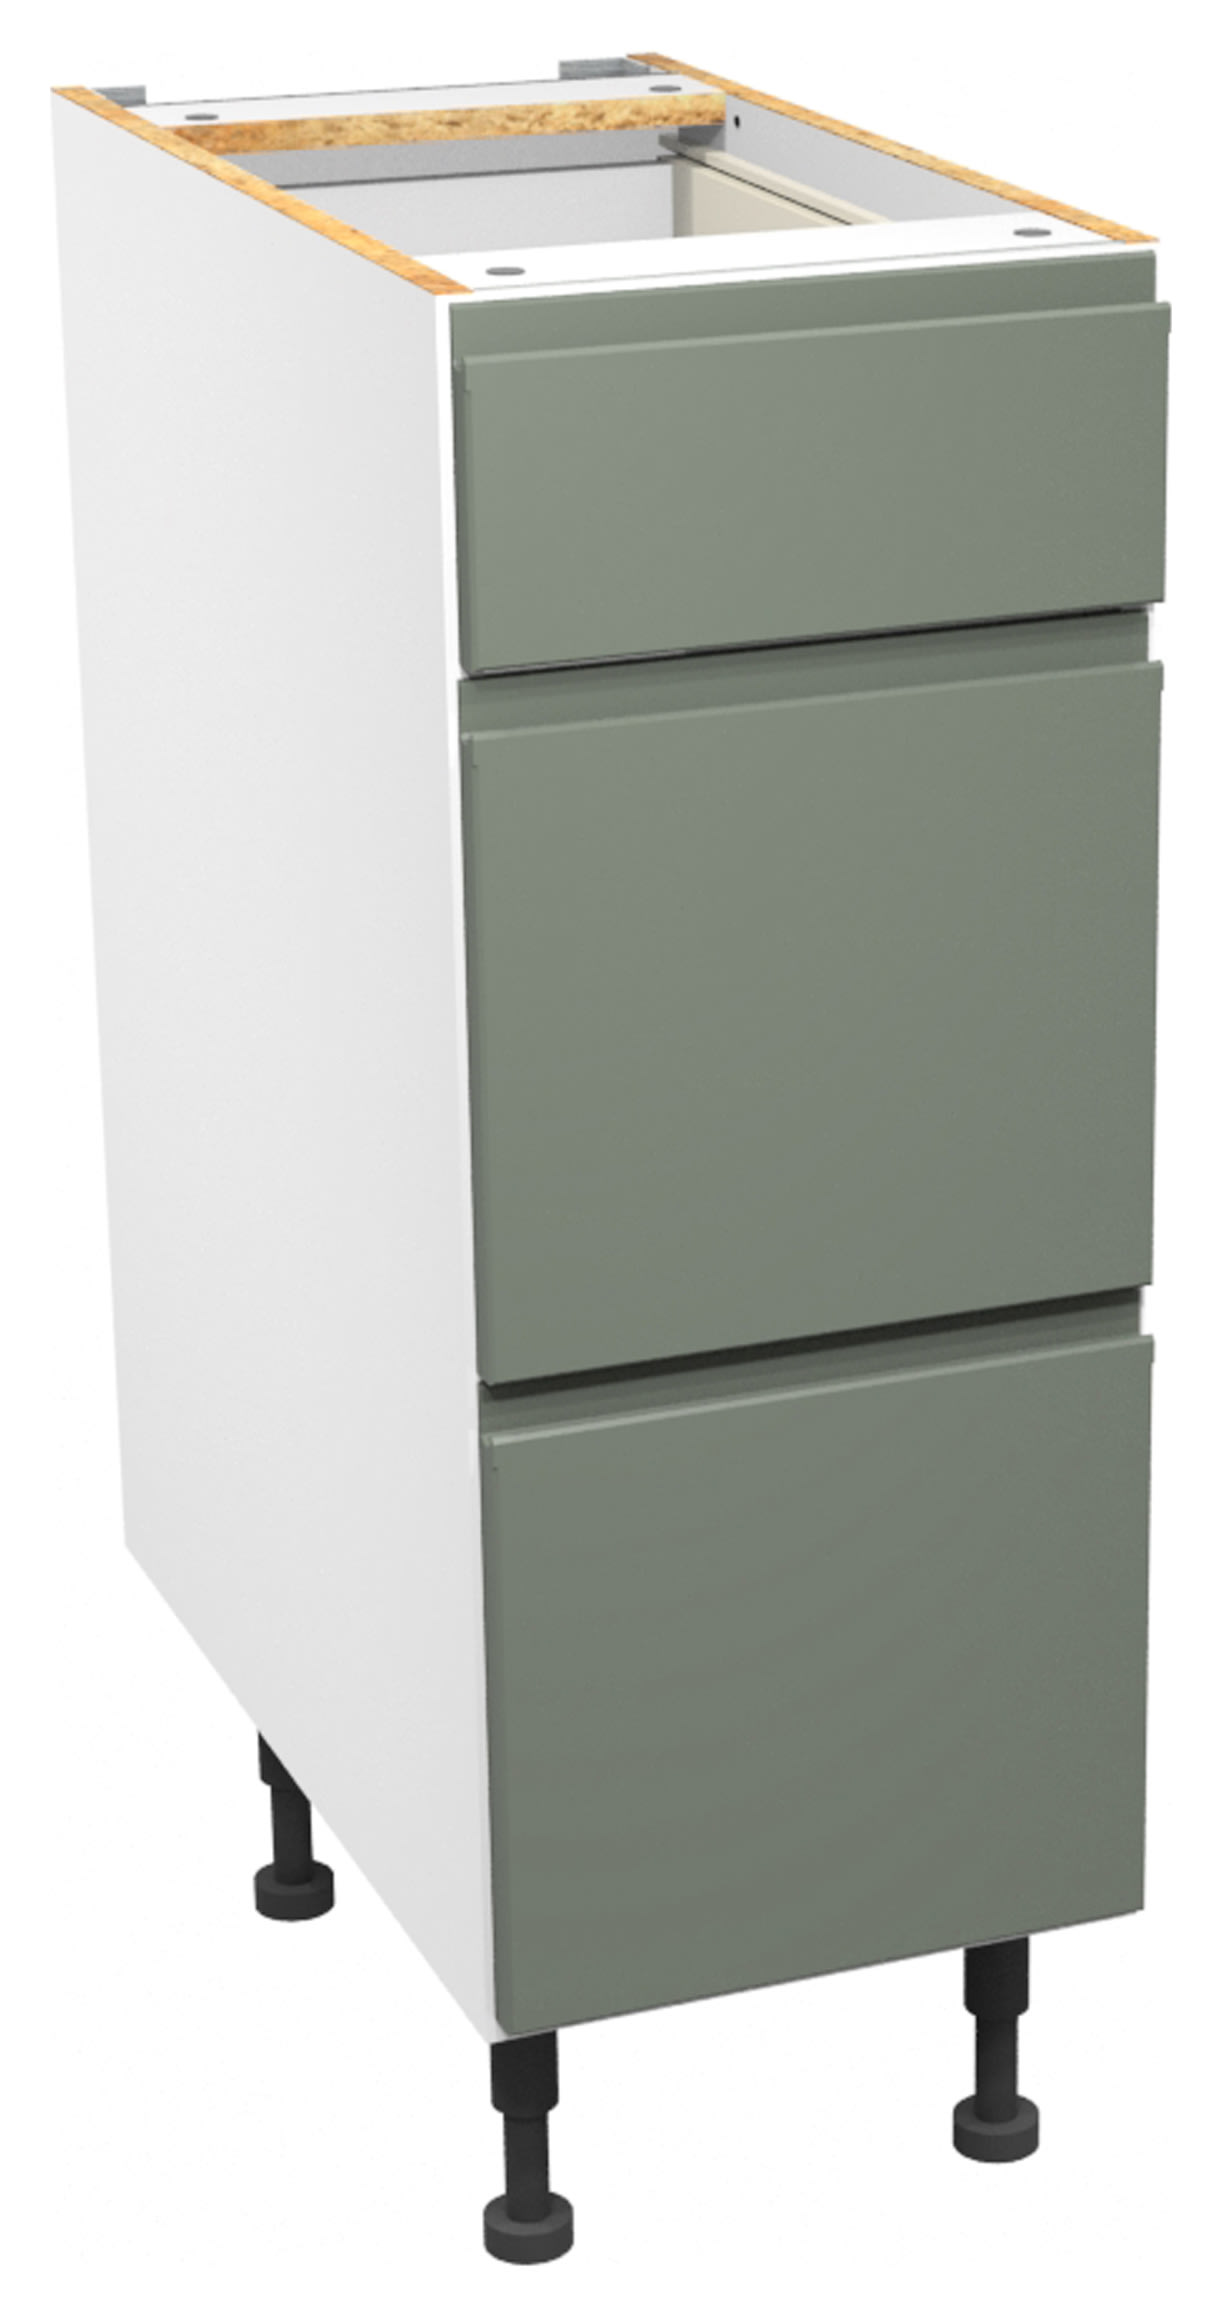 Wickes Madison Reed Green Drawer Unit - 300mm